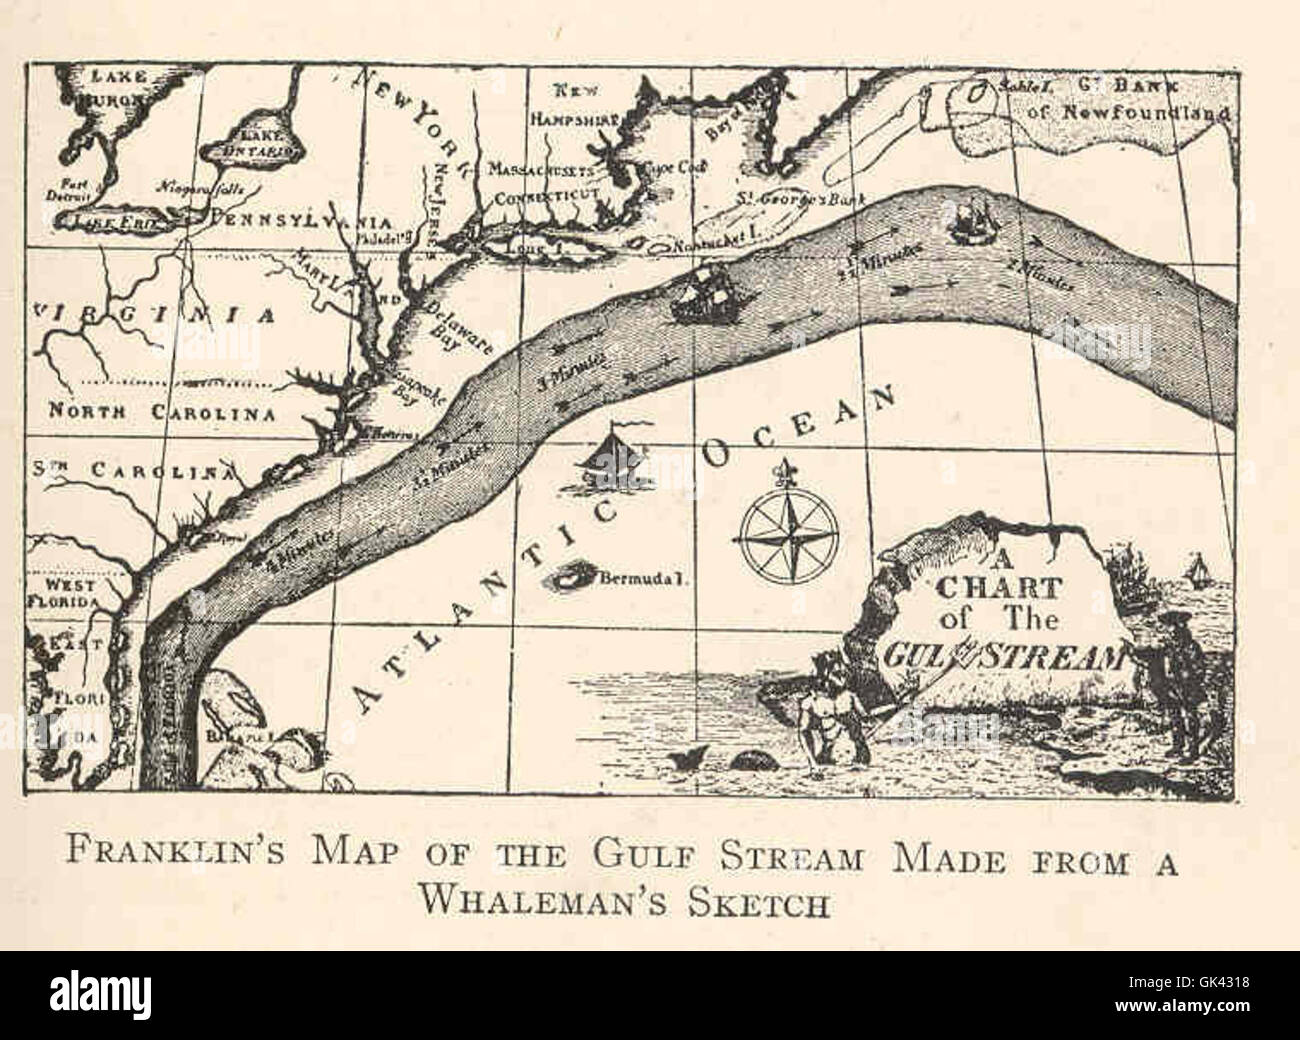 44639 Franklin's Map of the Gulf Stream Made from a Whaleman's Sketch Stock Photo